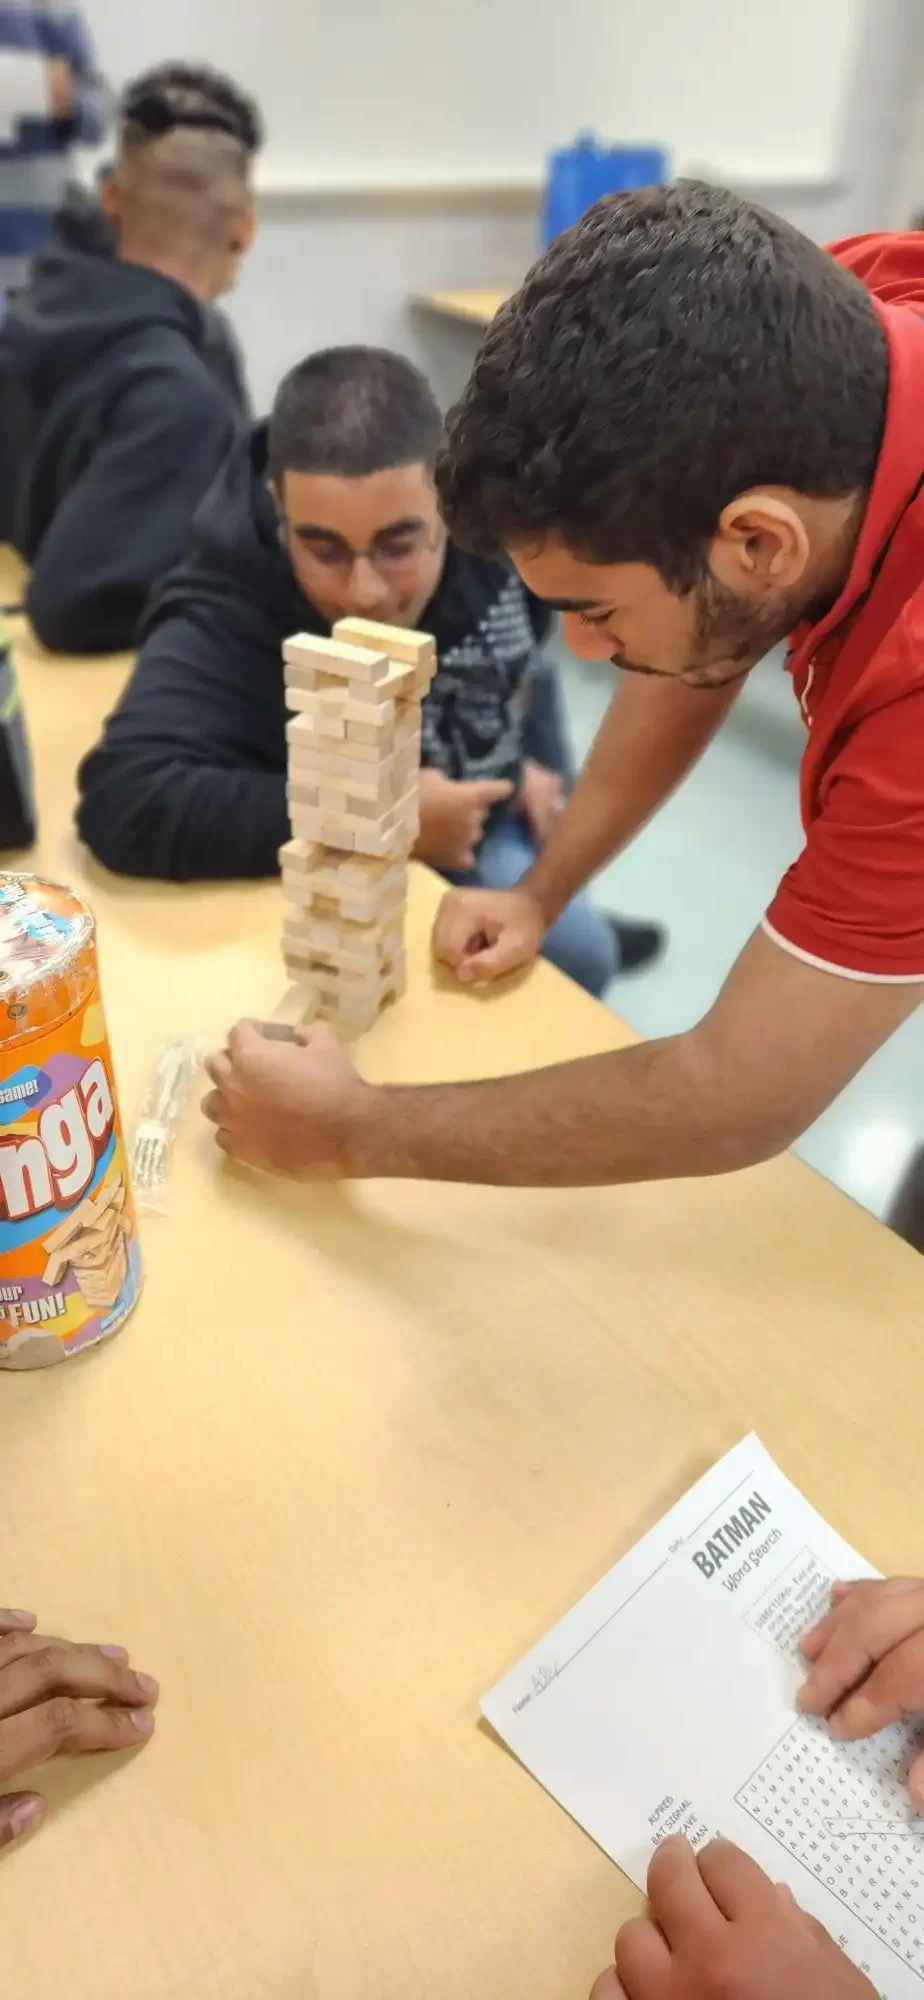 Two male students playing a black game called Jenga in the cafeteria